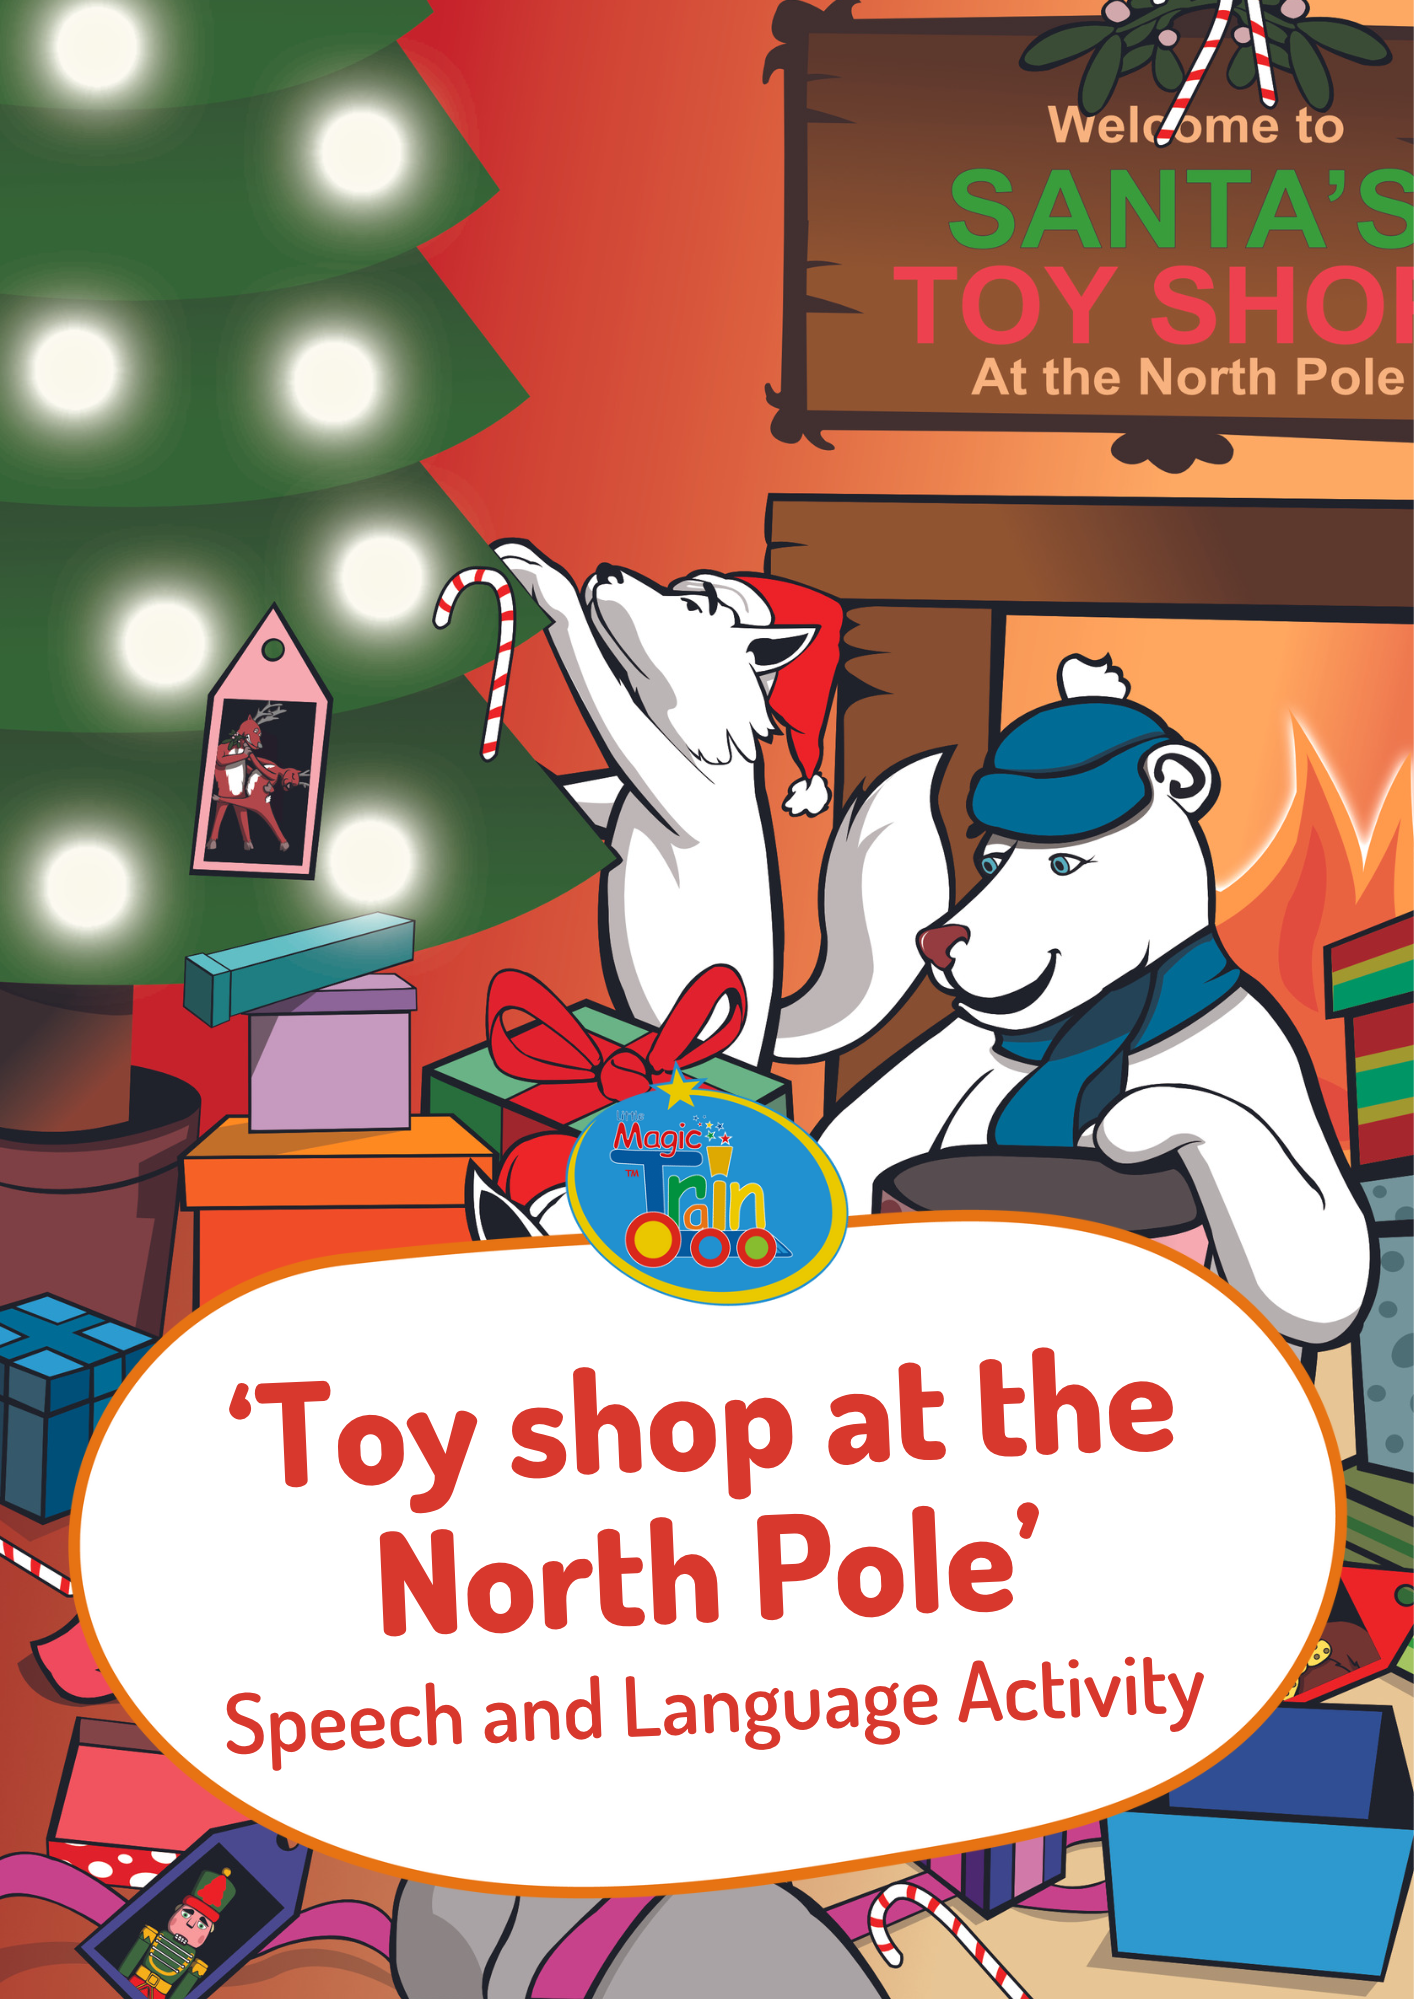 toy shop at the north pole shop image